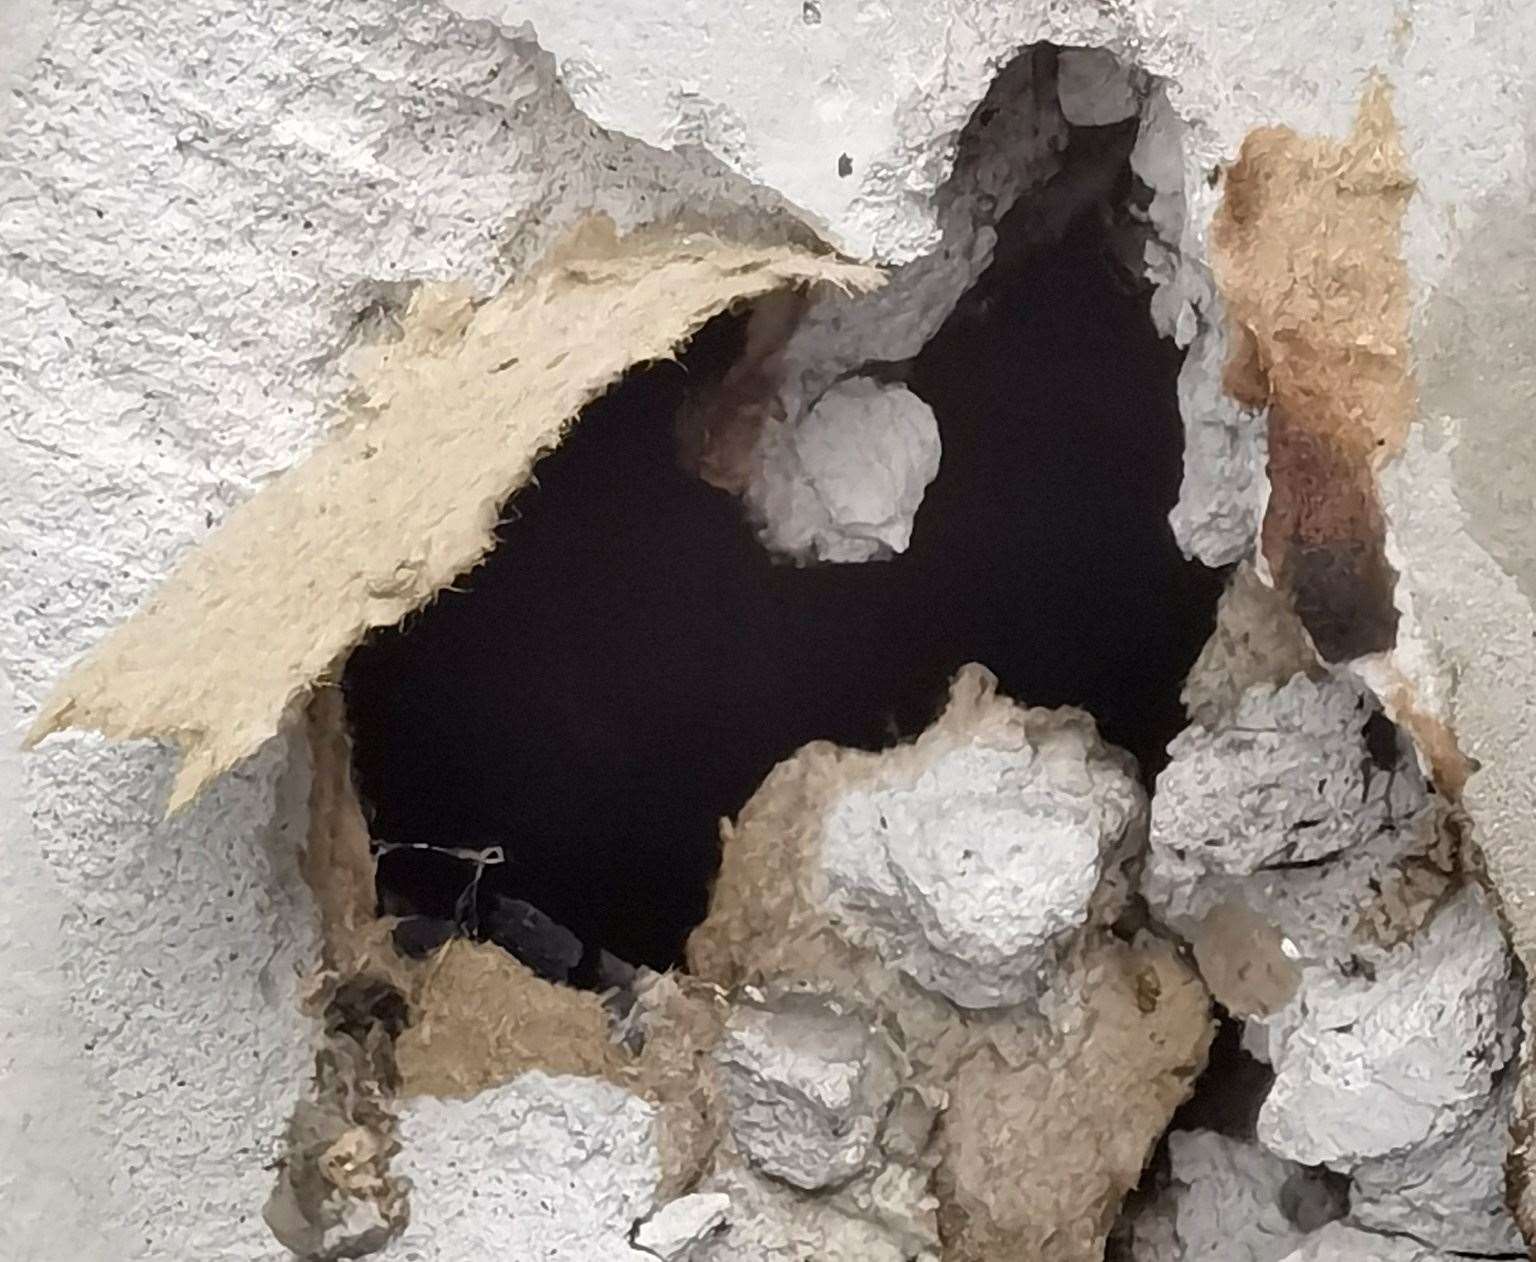 The McFarlane family say repairs have not be carried out to their house meaning they are unable to use the damaged part of the home. Picture: Trish McFarlane